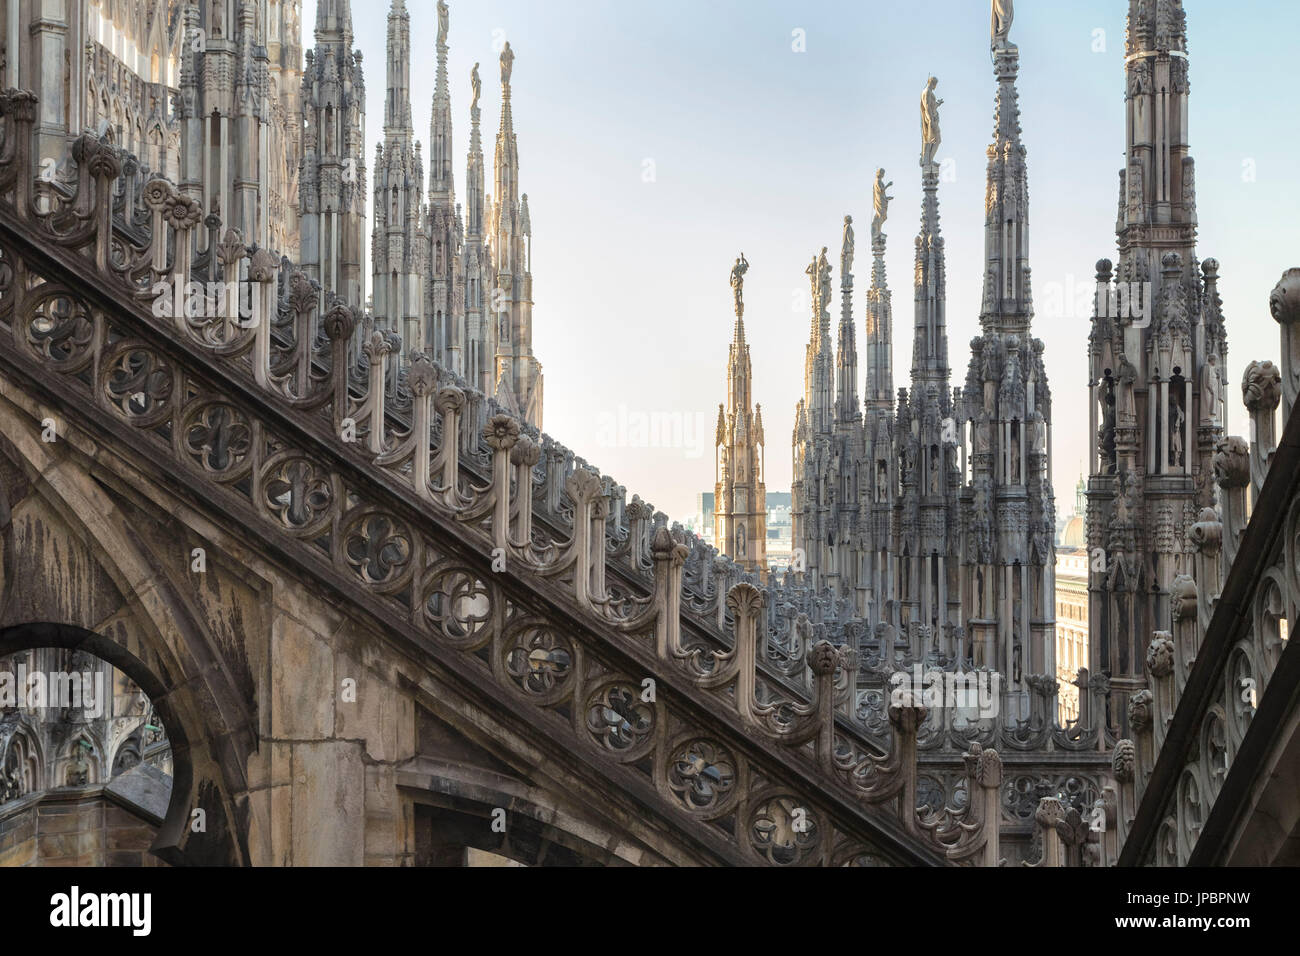 On the rooftop of the Duomo di Milano, among the white marble spiers, Milano, Lombardy, Italy. Stock Photo